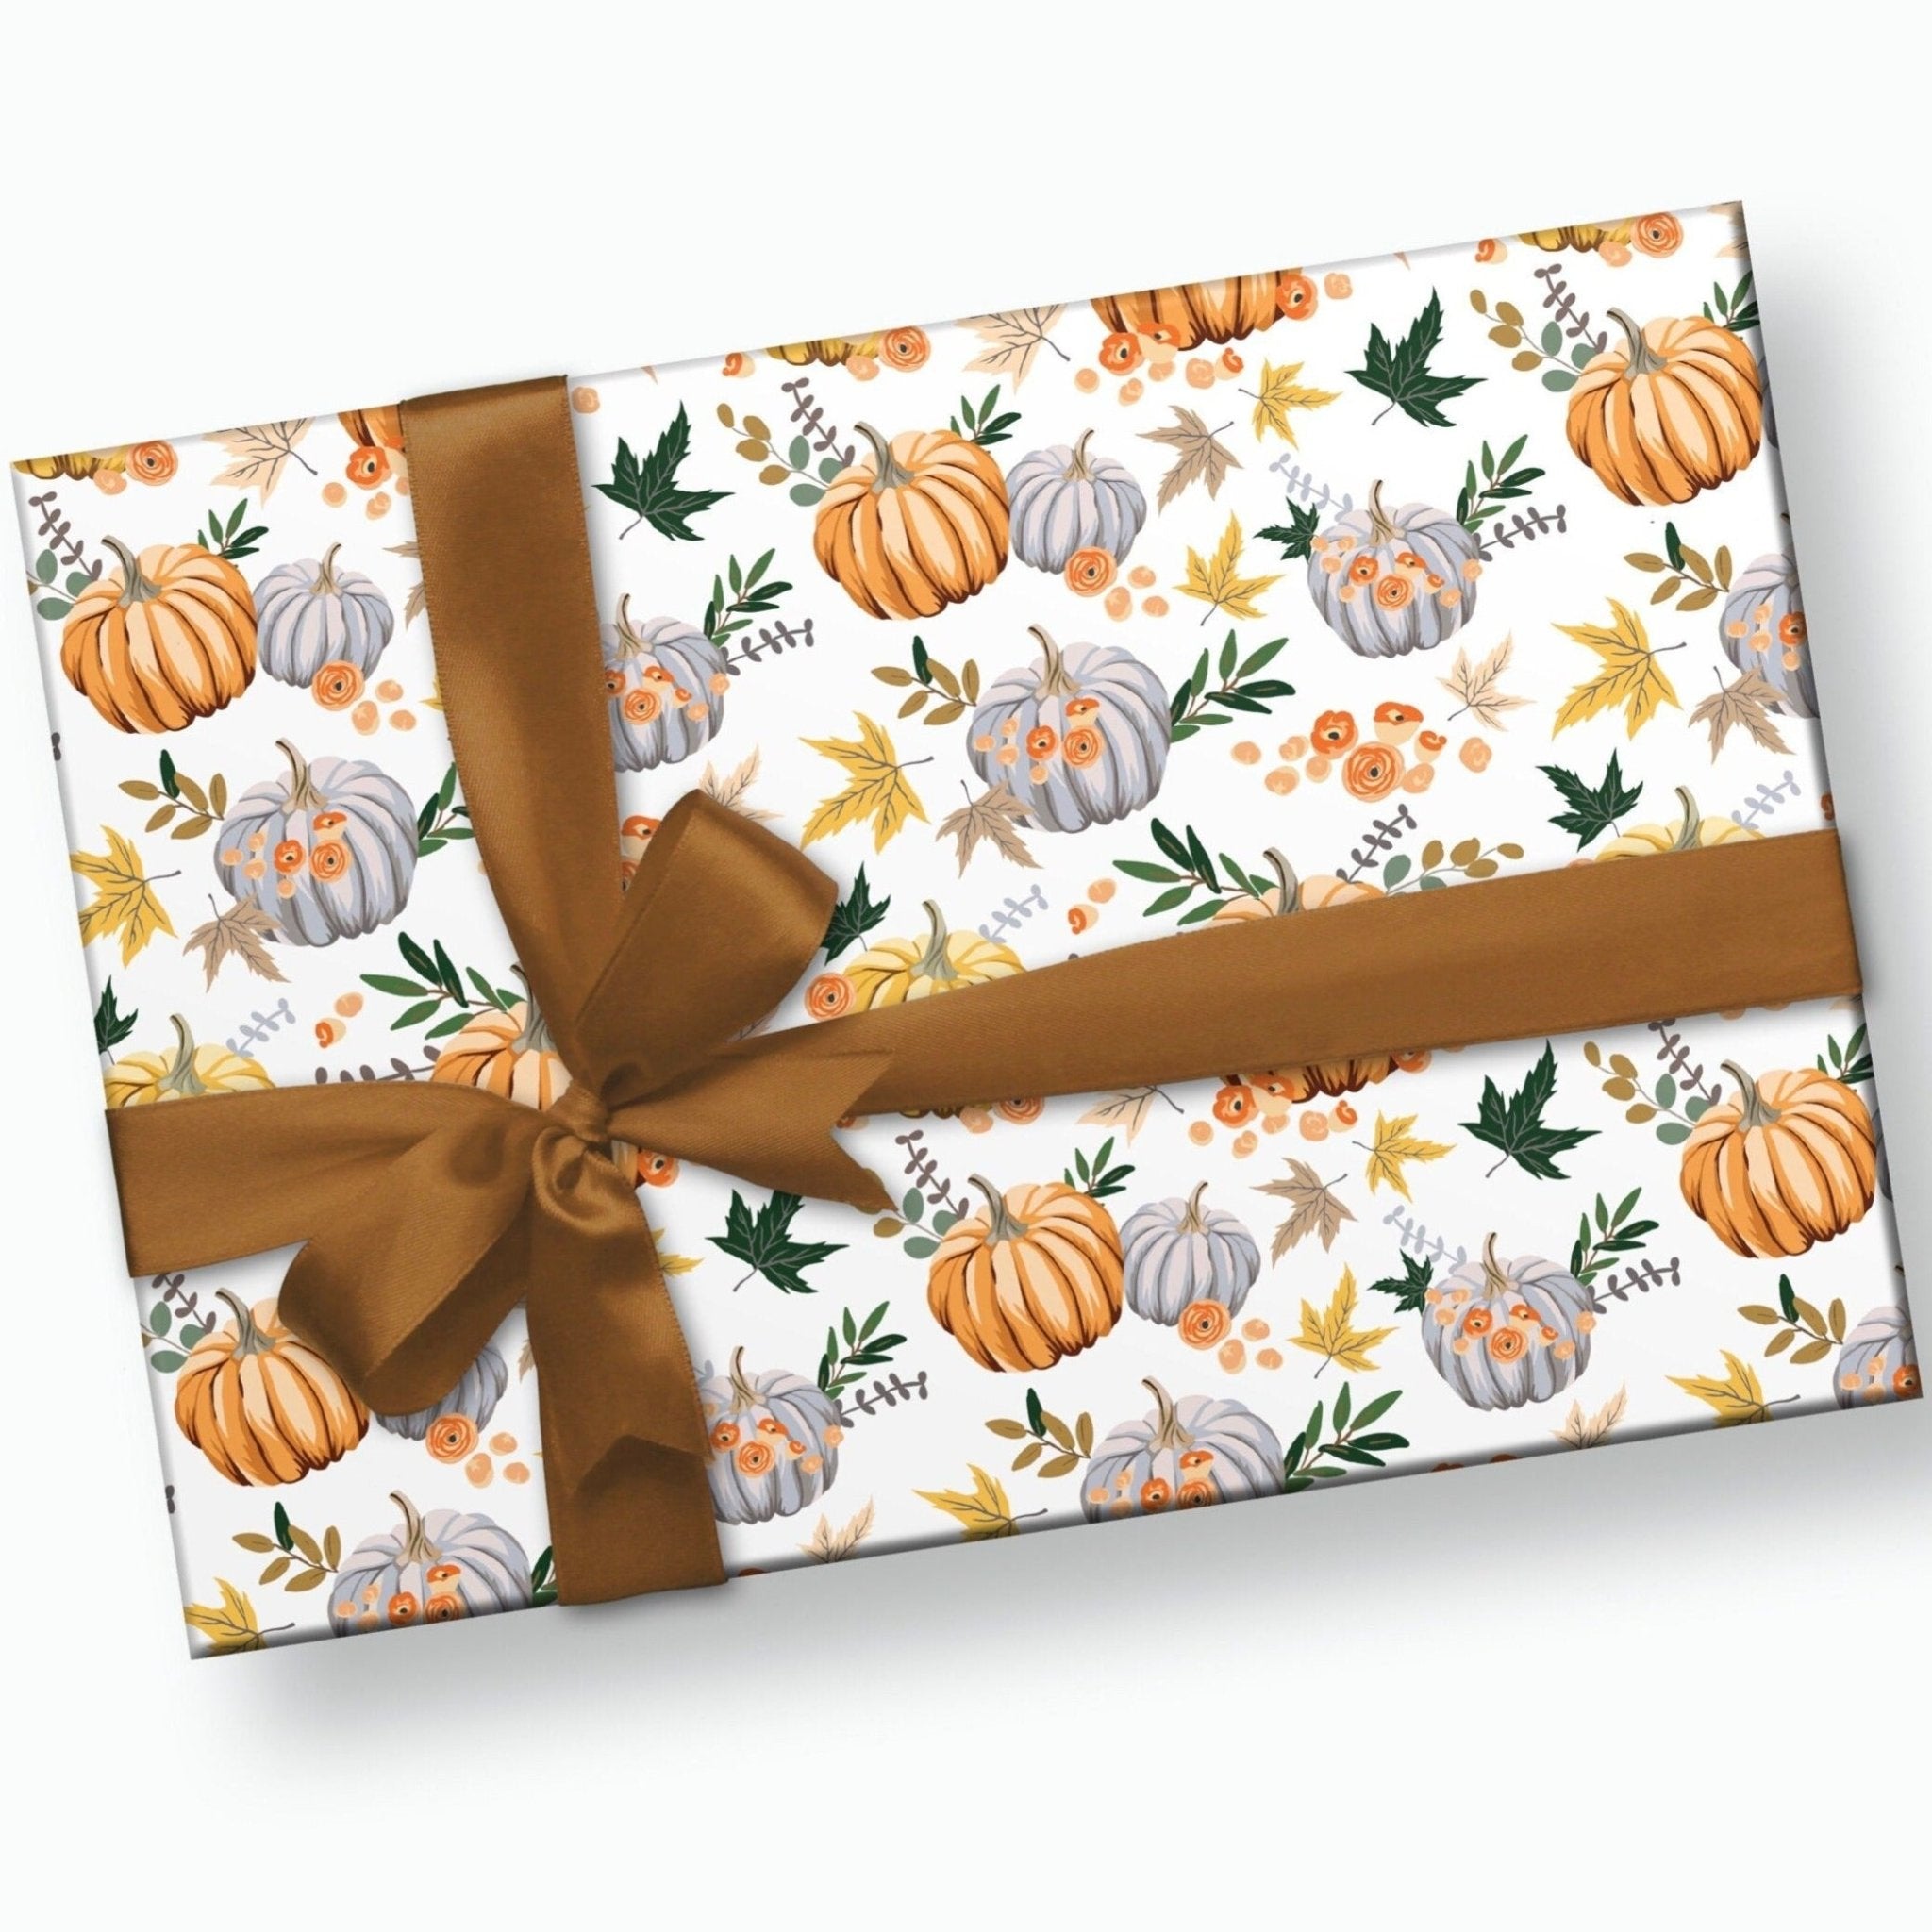 WRAPAHOLIC Wrapping Paper Sheet - Maple Leaf and Pumpkin Autumn Design for Fall Celebrating, Birthday, Holiday, Wedding, Baby Shower - 1 Roll